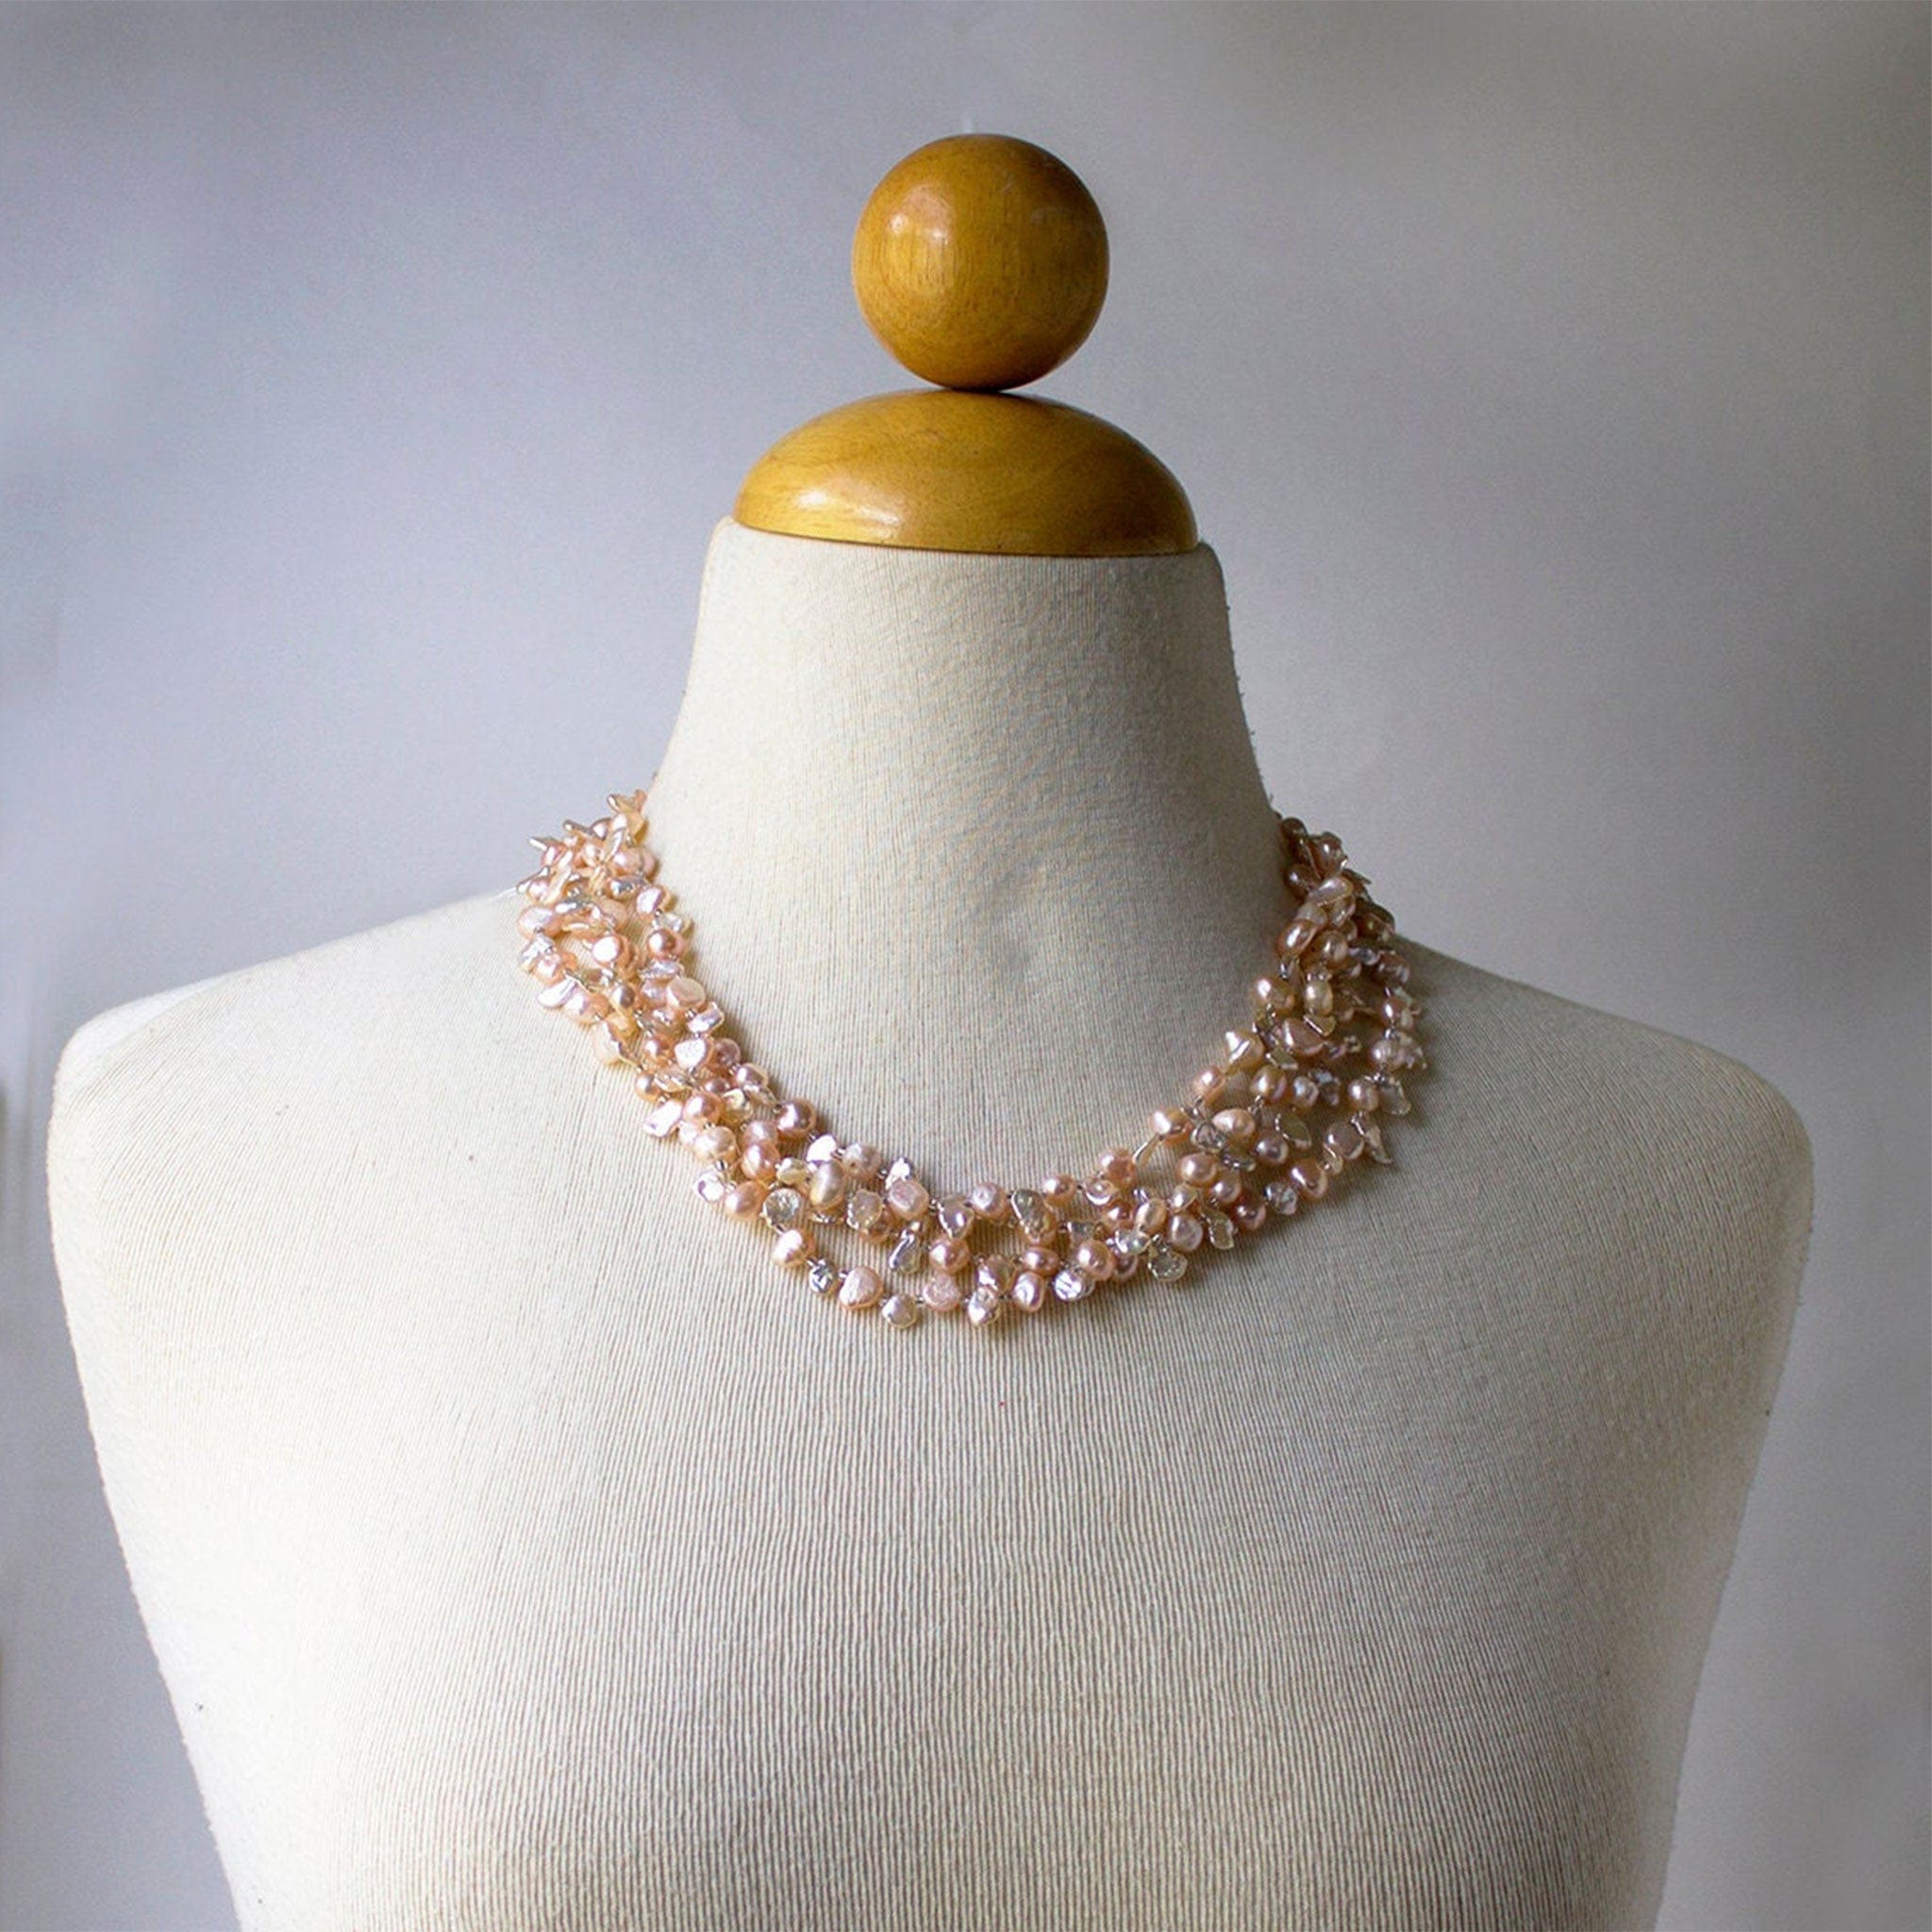 Keshi Pearl Pendant Charm in 18k Gold Vermeil on Sterling Silver and Pearl  | Jewellery by Monica Vinader